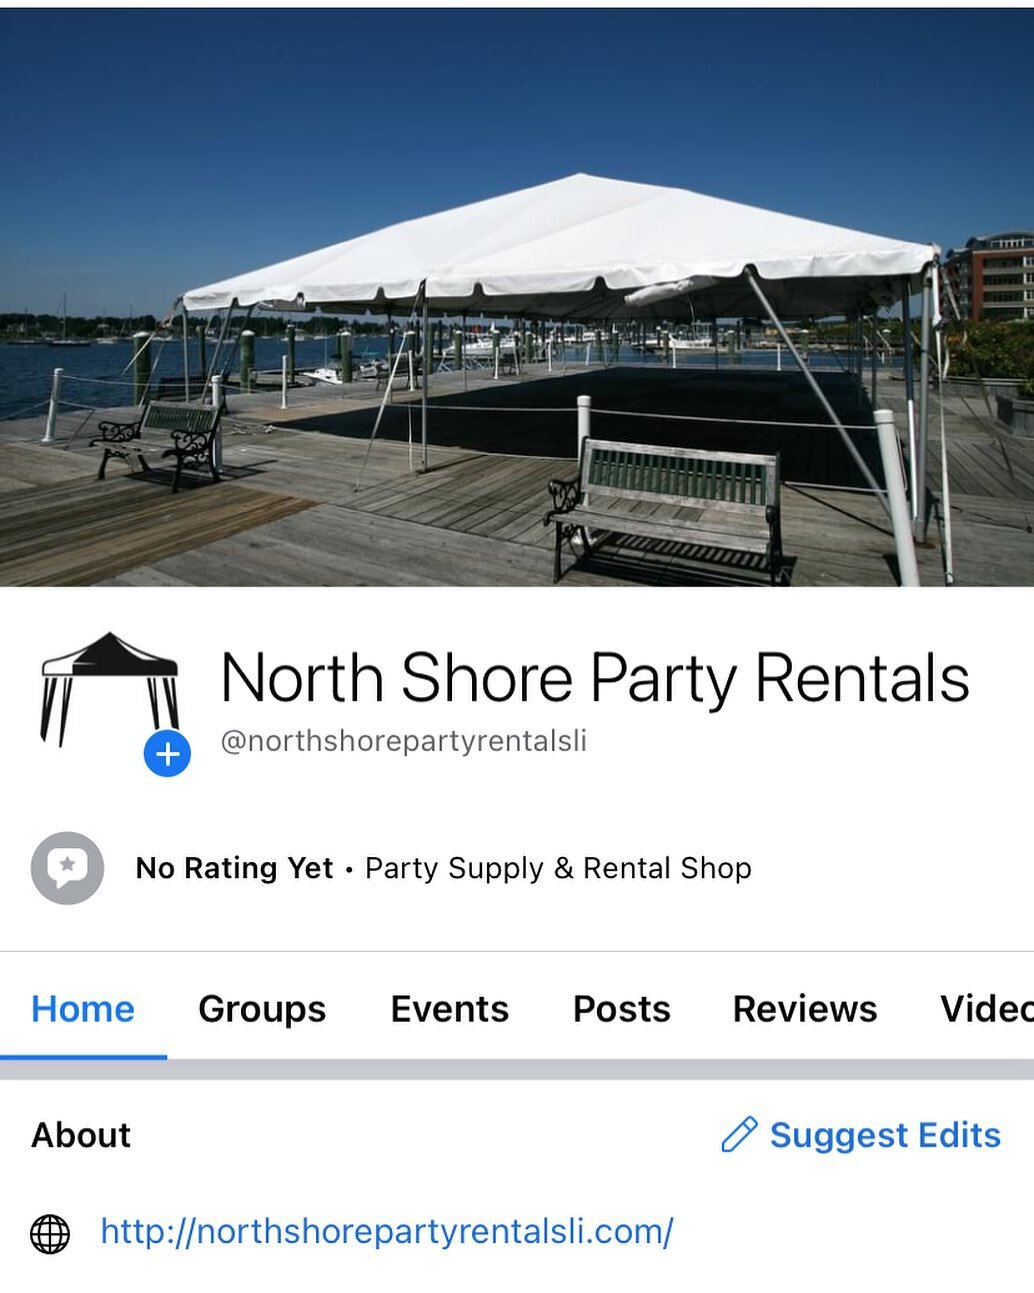 We just launched our Facebook page and are working on publishing our website soon! Excited to be serving Long Island this upcoming season! Stay tuned for more updates and information!